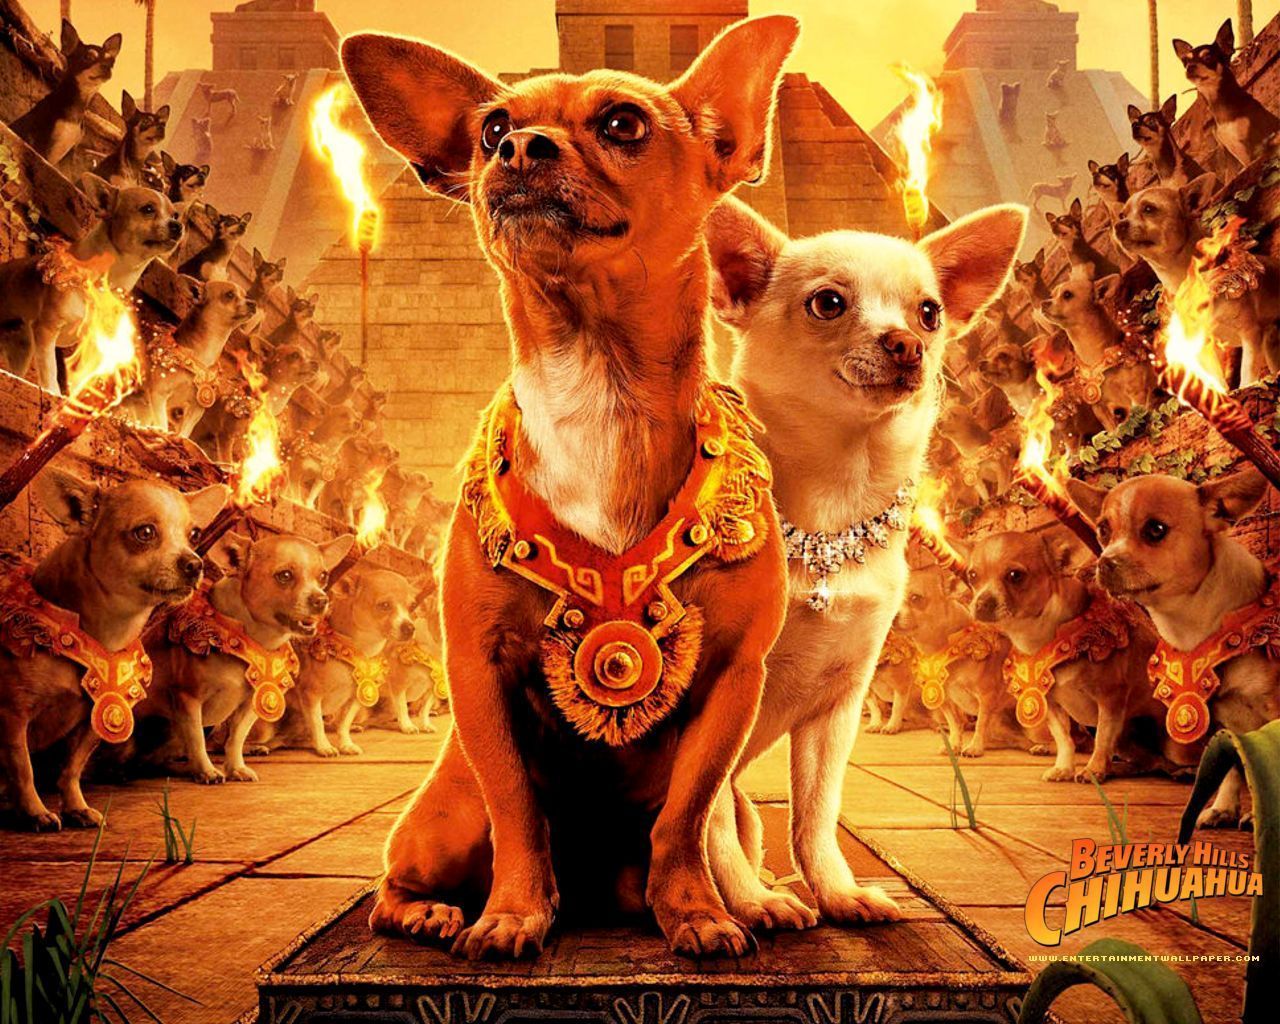 DVD cover Wallpaper - Beverly Hills Chihuahua movie Wallpaper ...